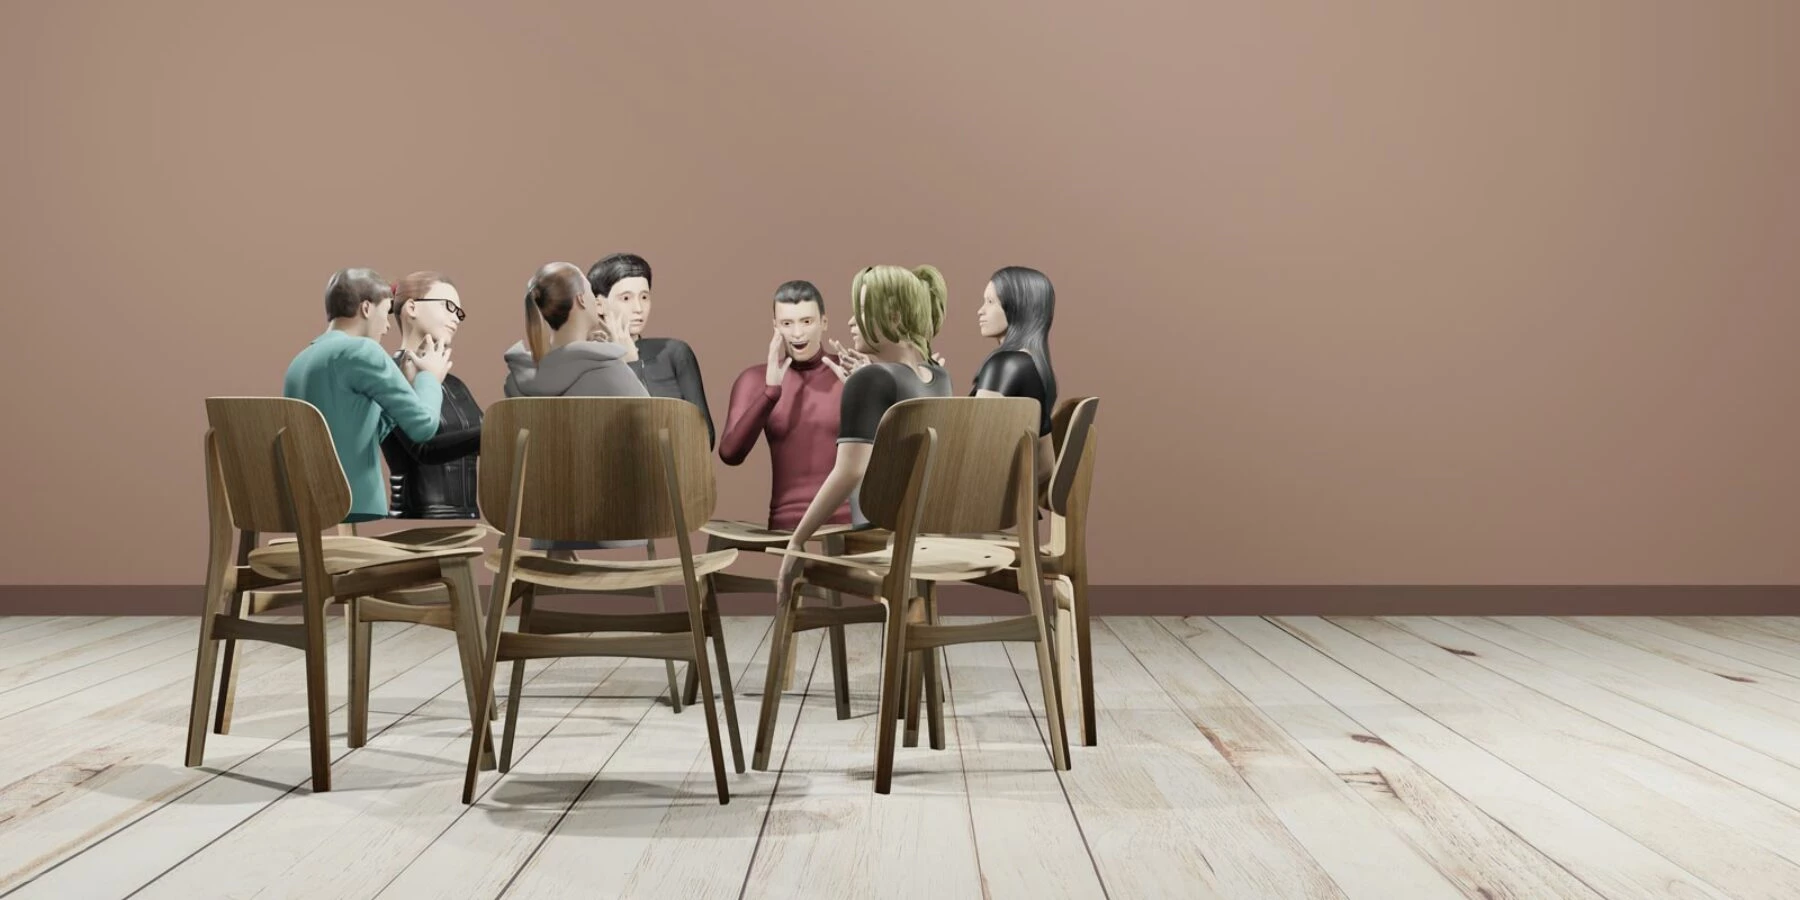 Circle of computer generated people on chairs